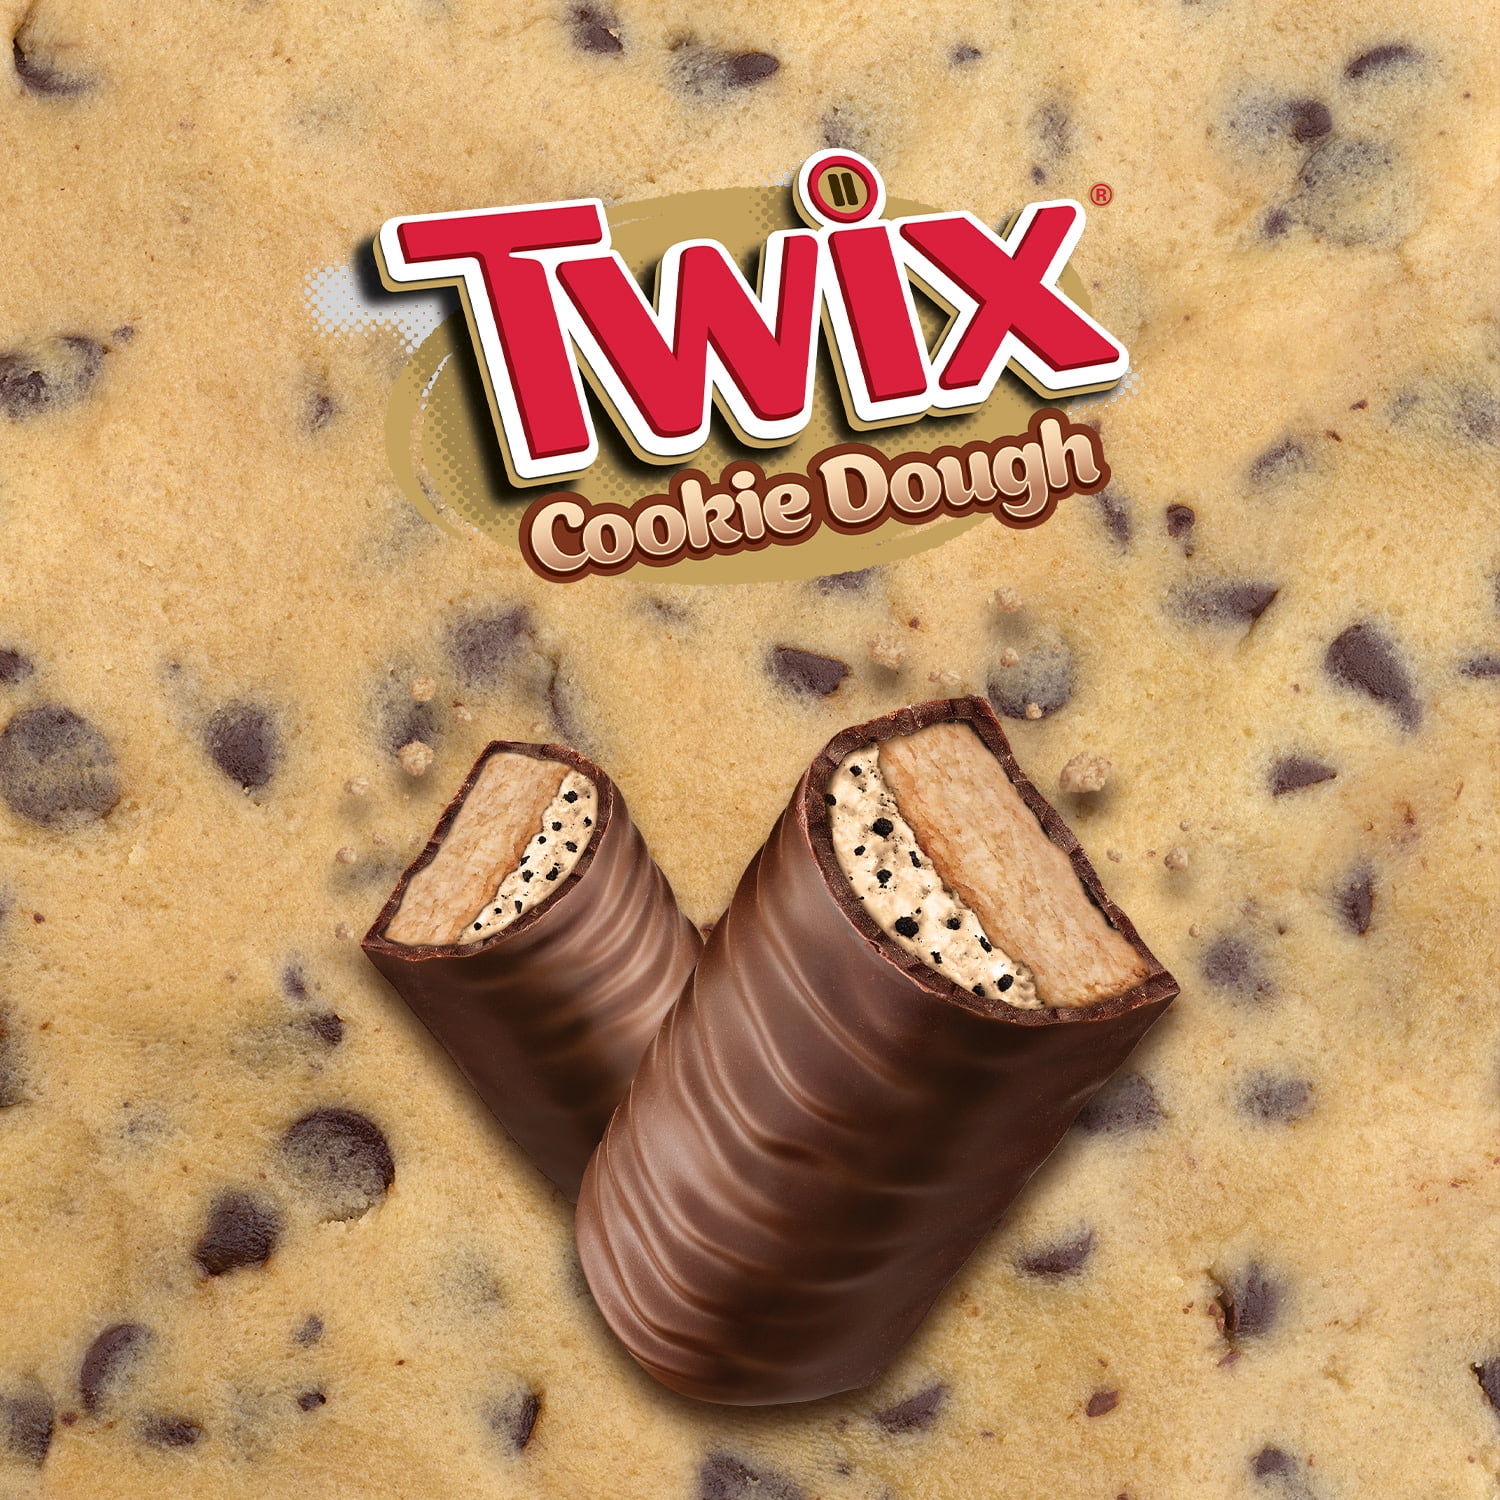 New Twix Cookie Dough candy bar is coming. Here's how to get an early free  sample. 